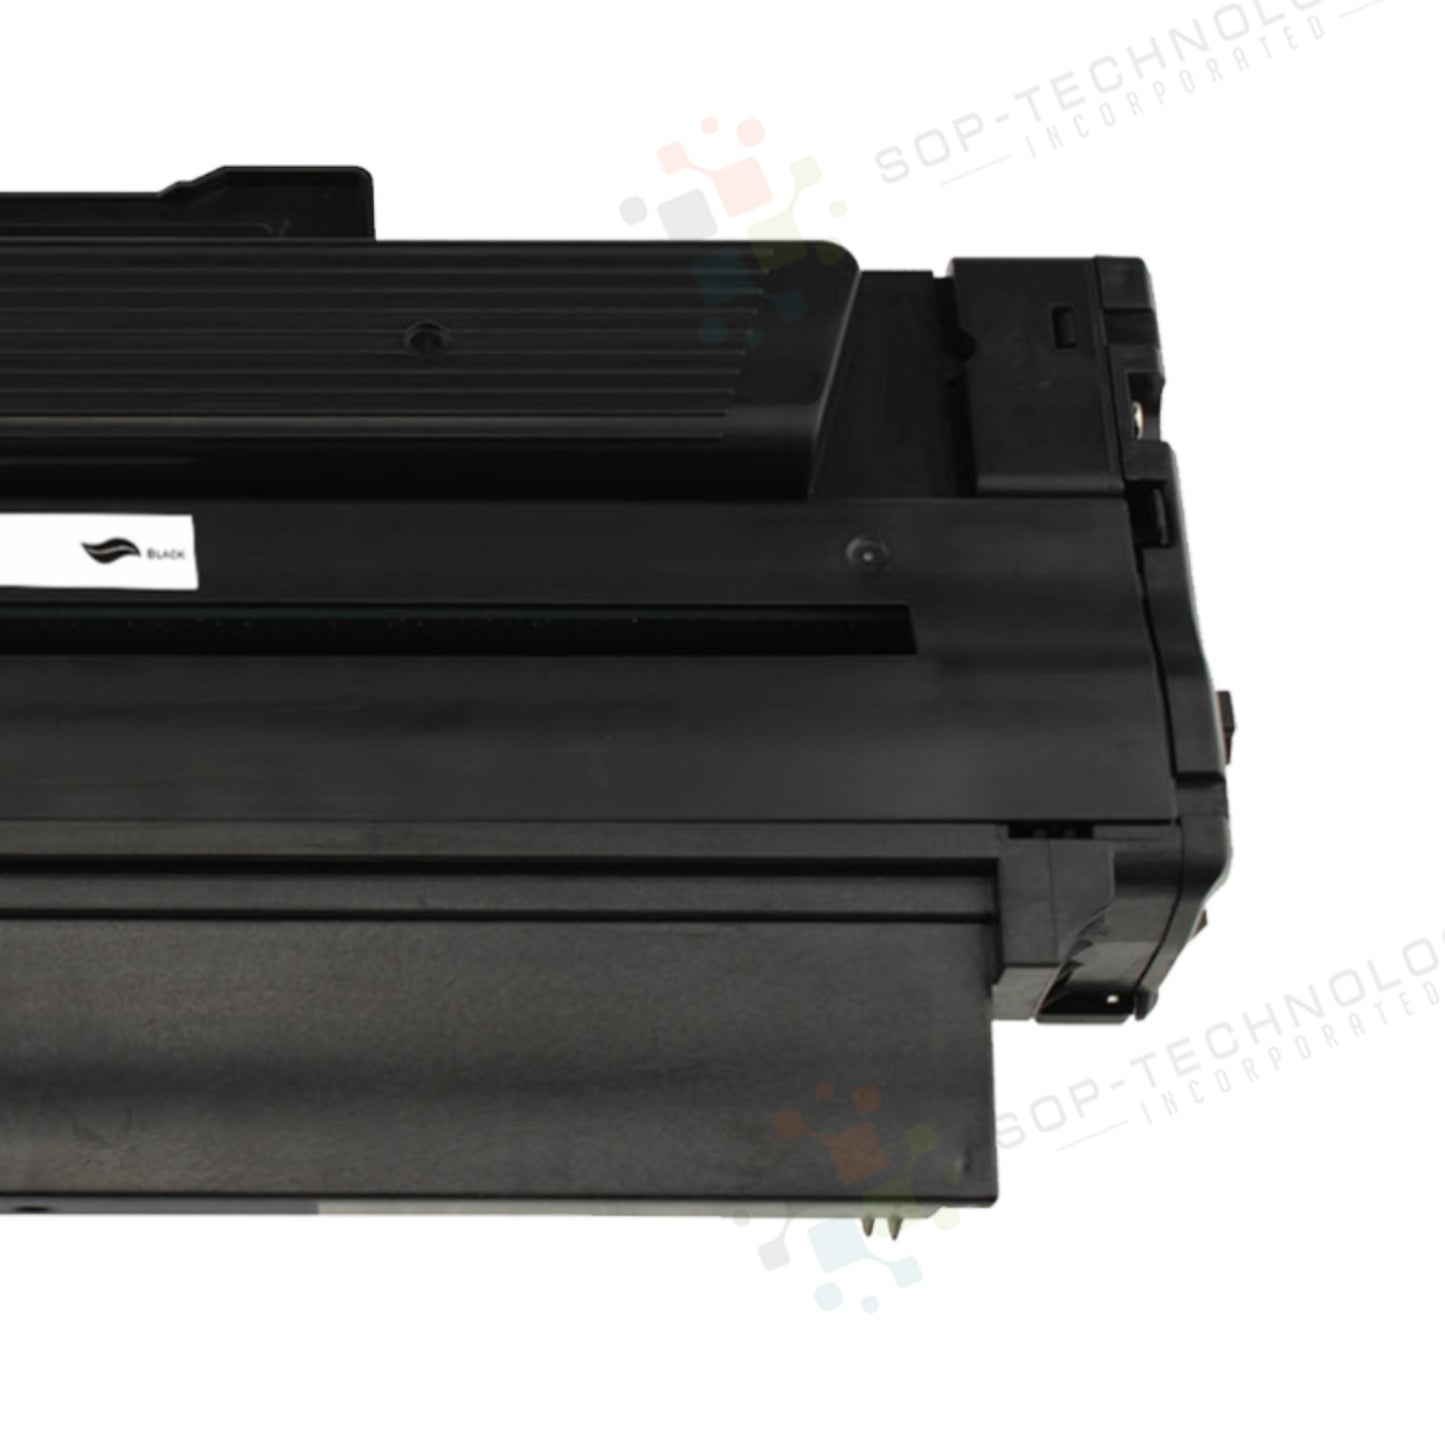 5 Pack Toner Cartridge Replacement for Dell 1130 - SOP-TECHNOLOGIES, INC.